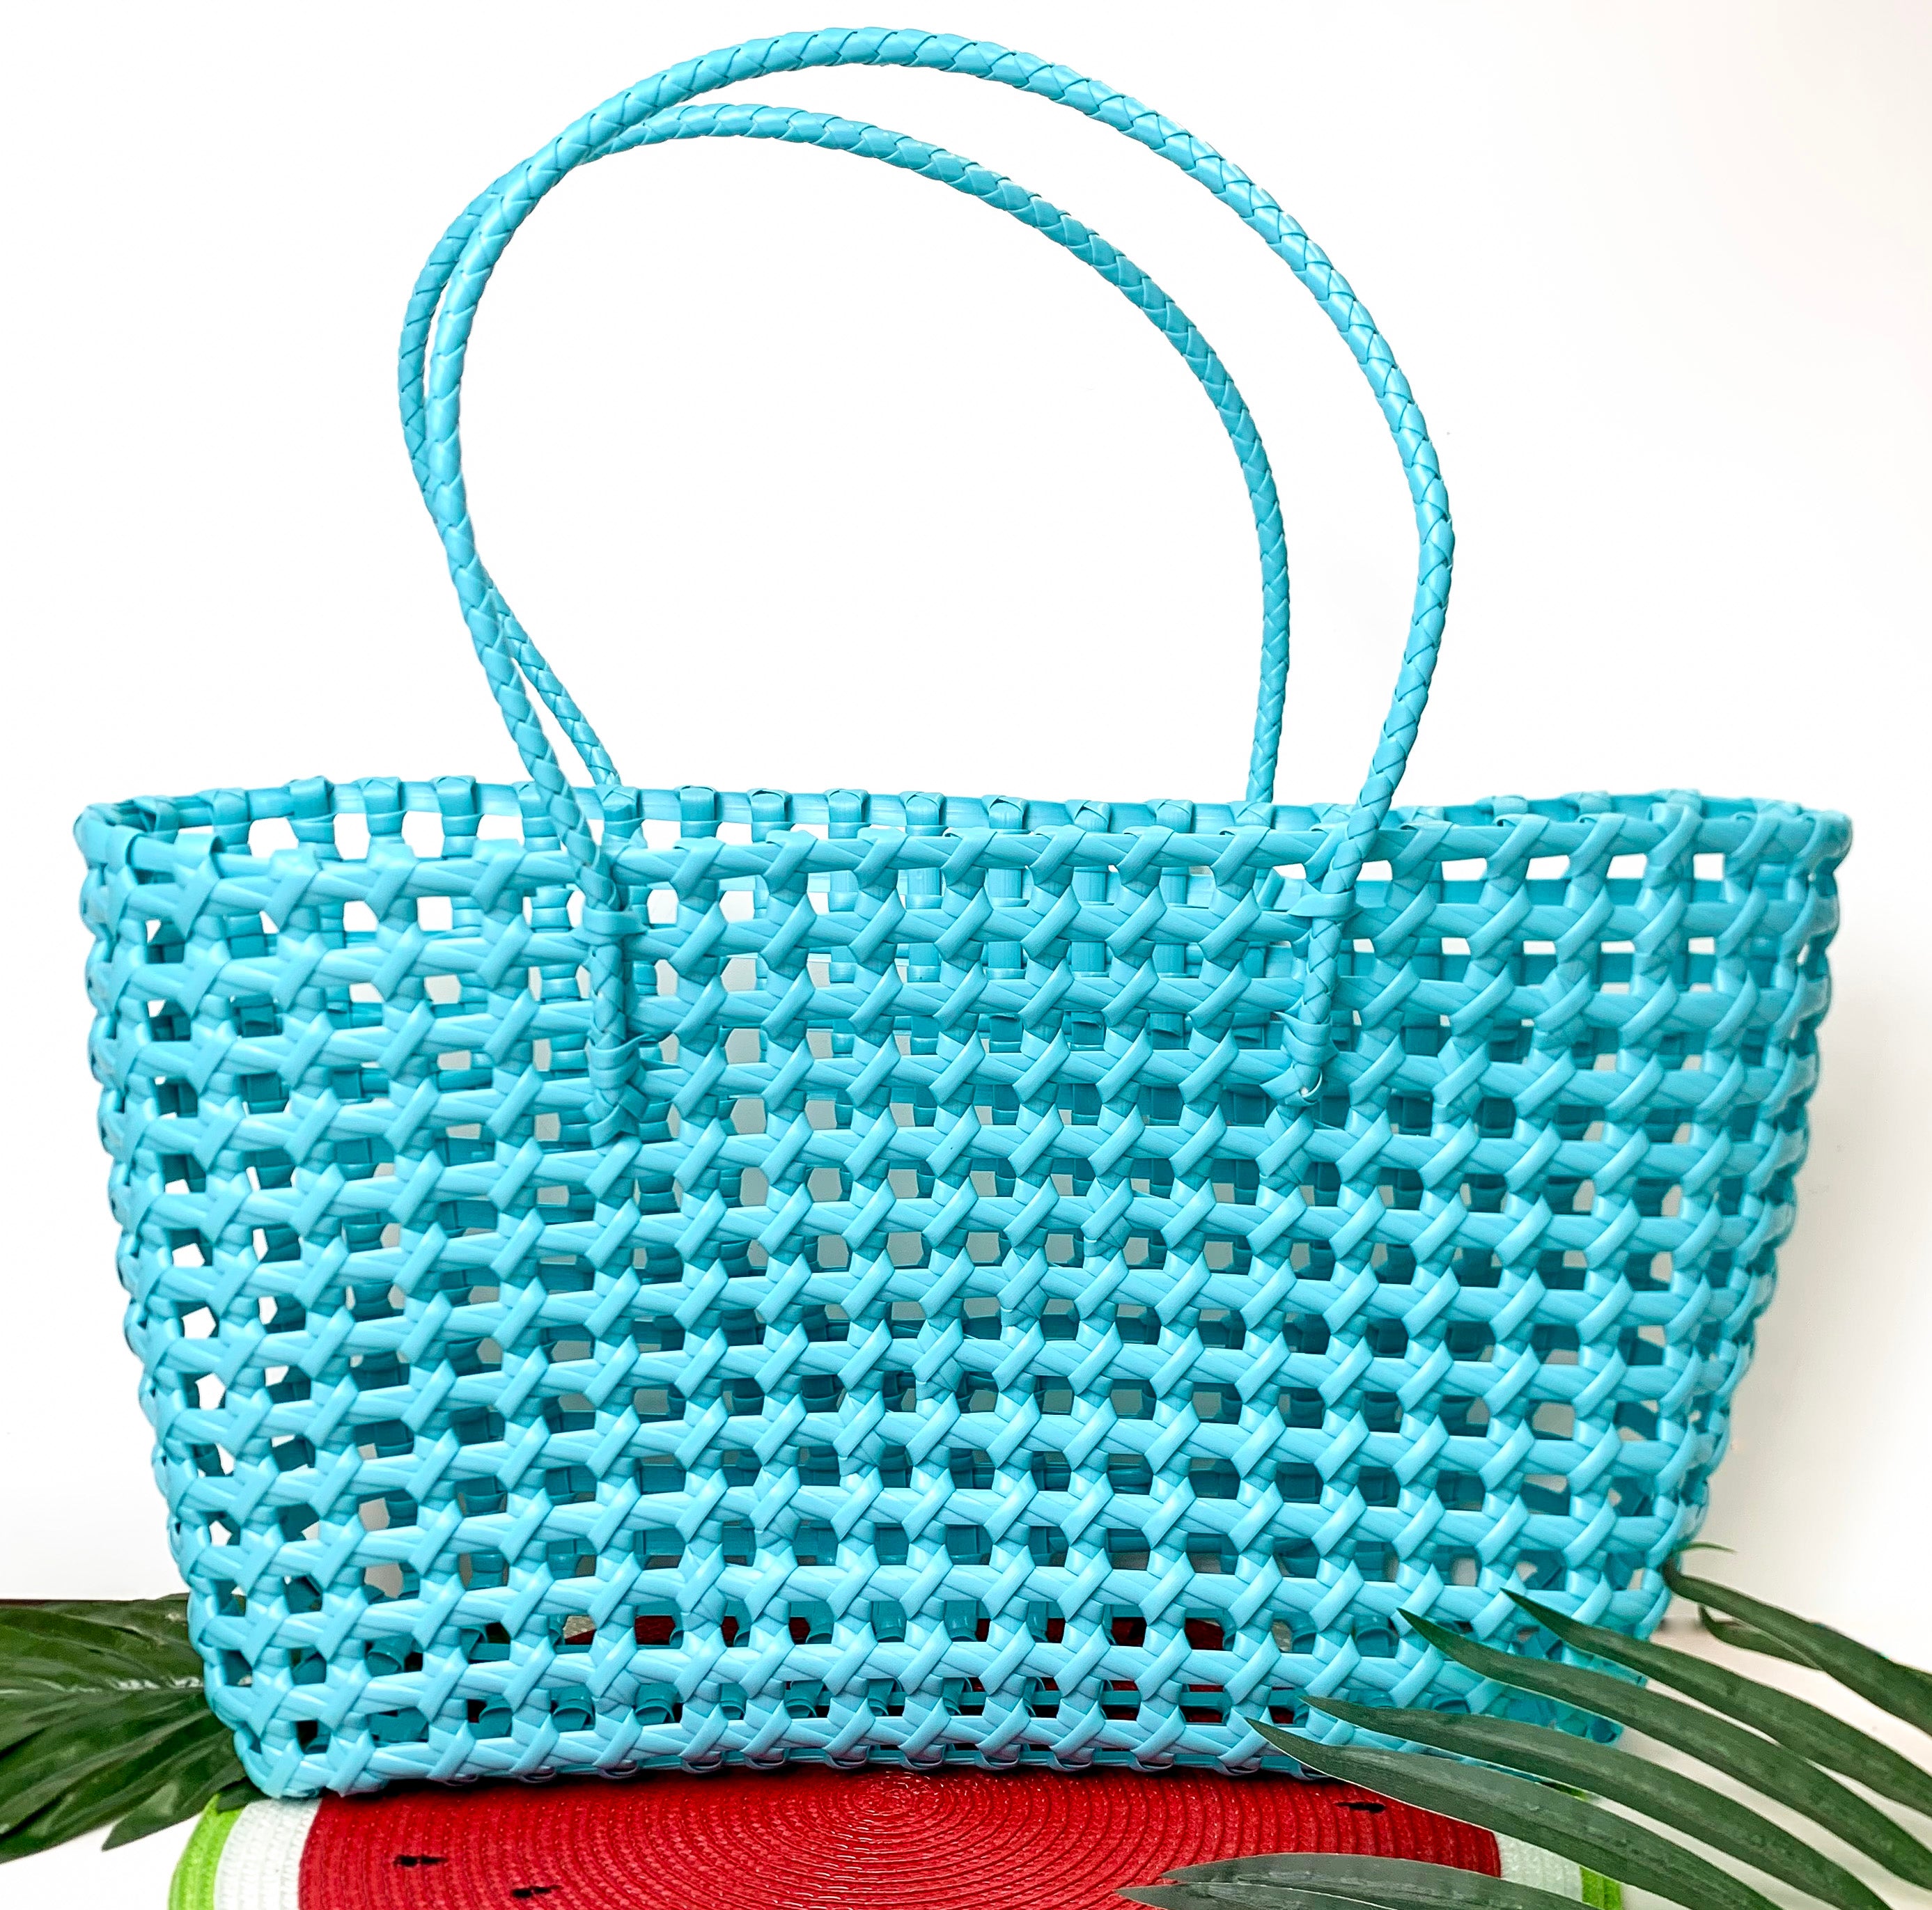 Beachy Brights Basket Tote Bag in Turquoise Blue